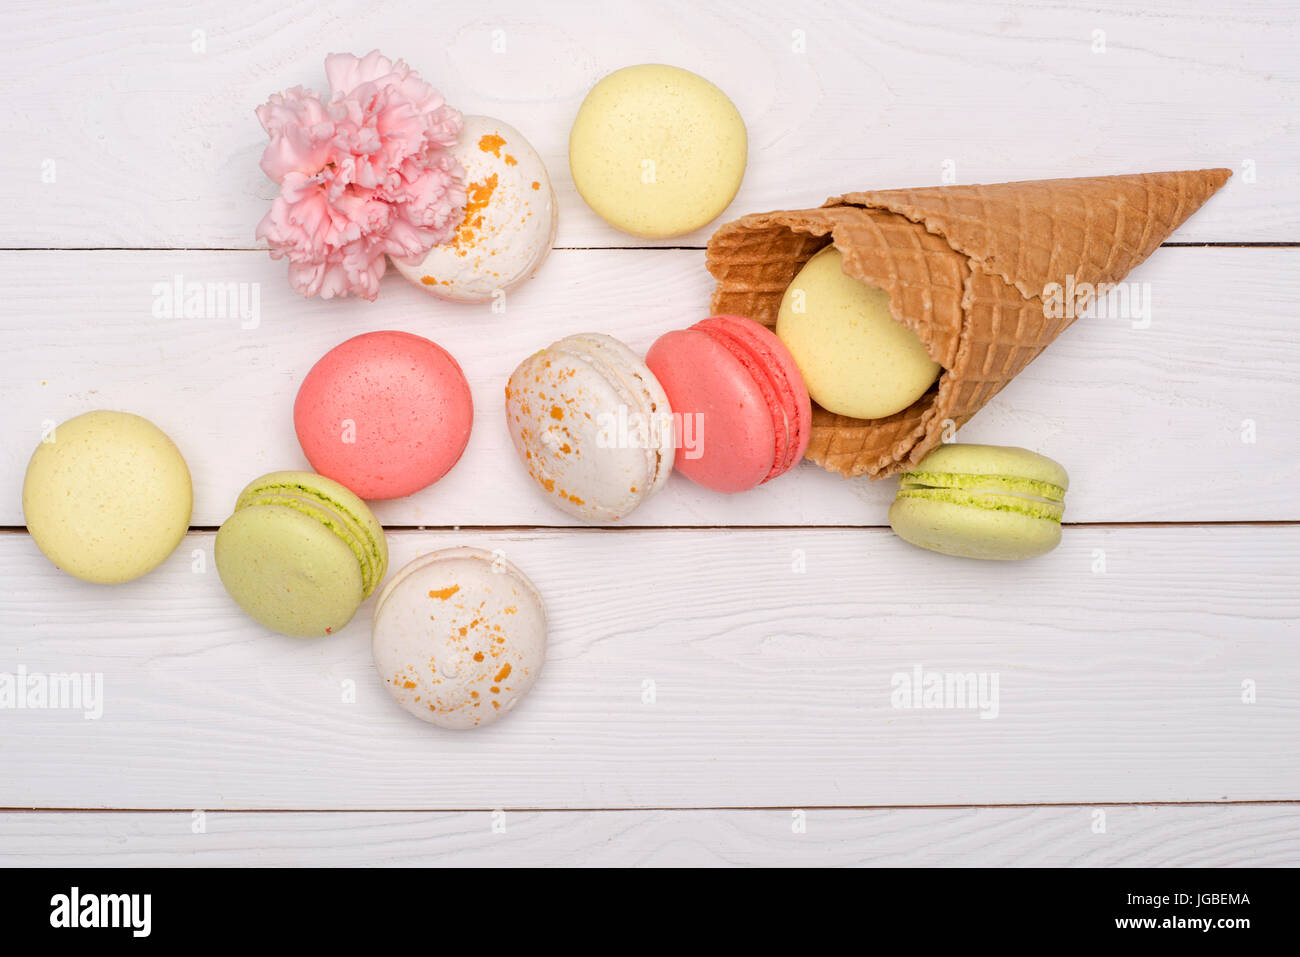 Stack of sweet macaroons and waffle cones styling with flower on wooden surface. sweets background Stock Photo